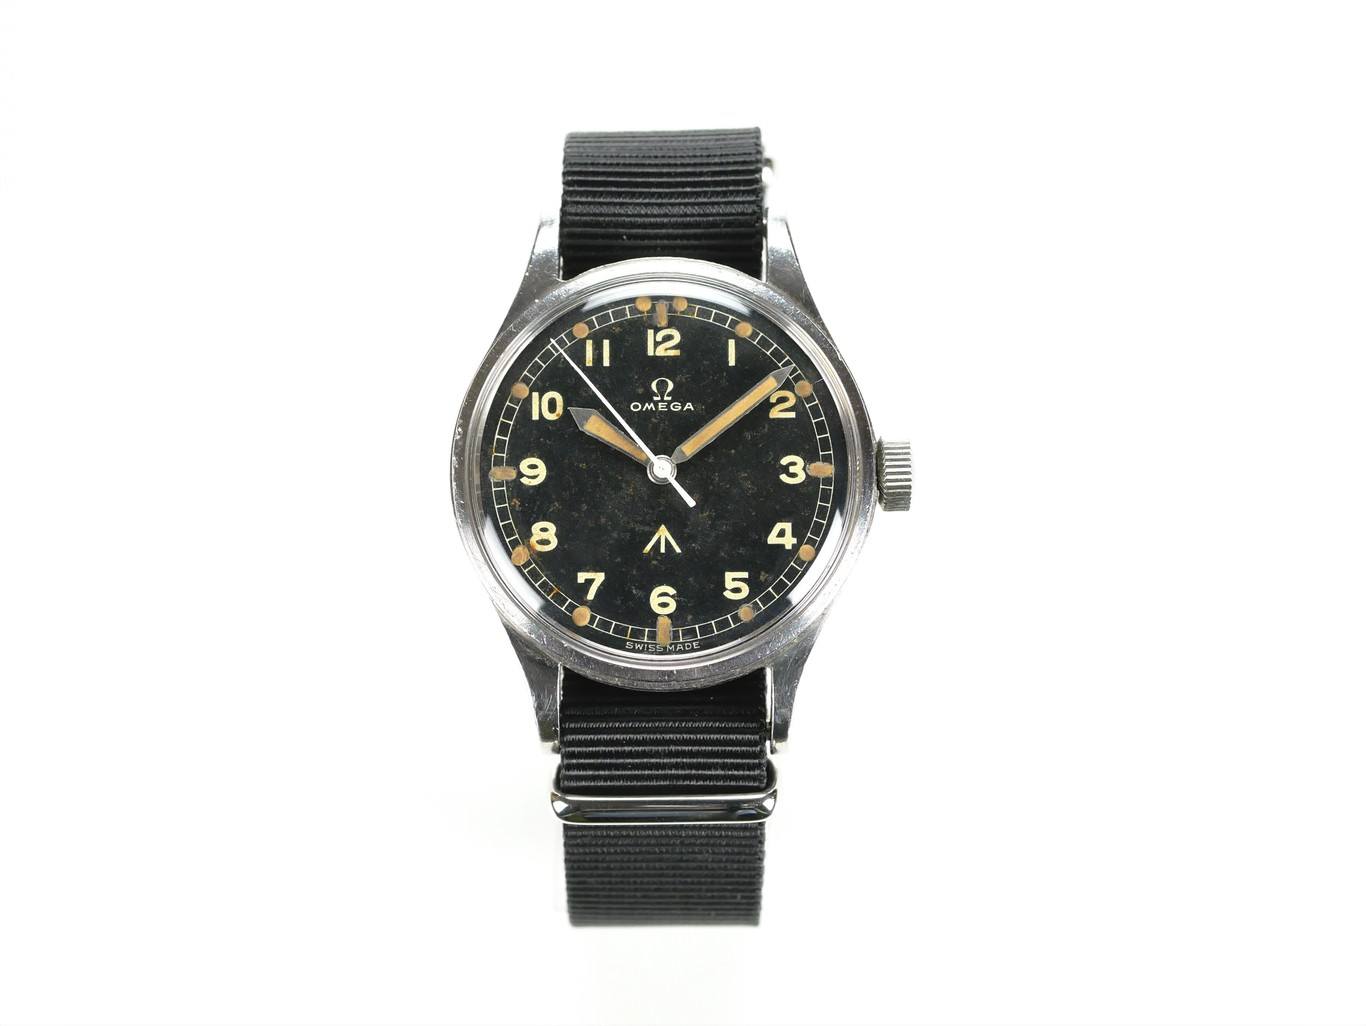 omega 53 military watch